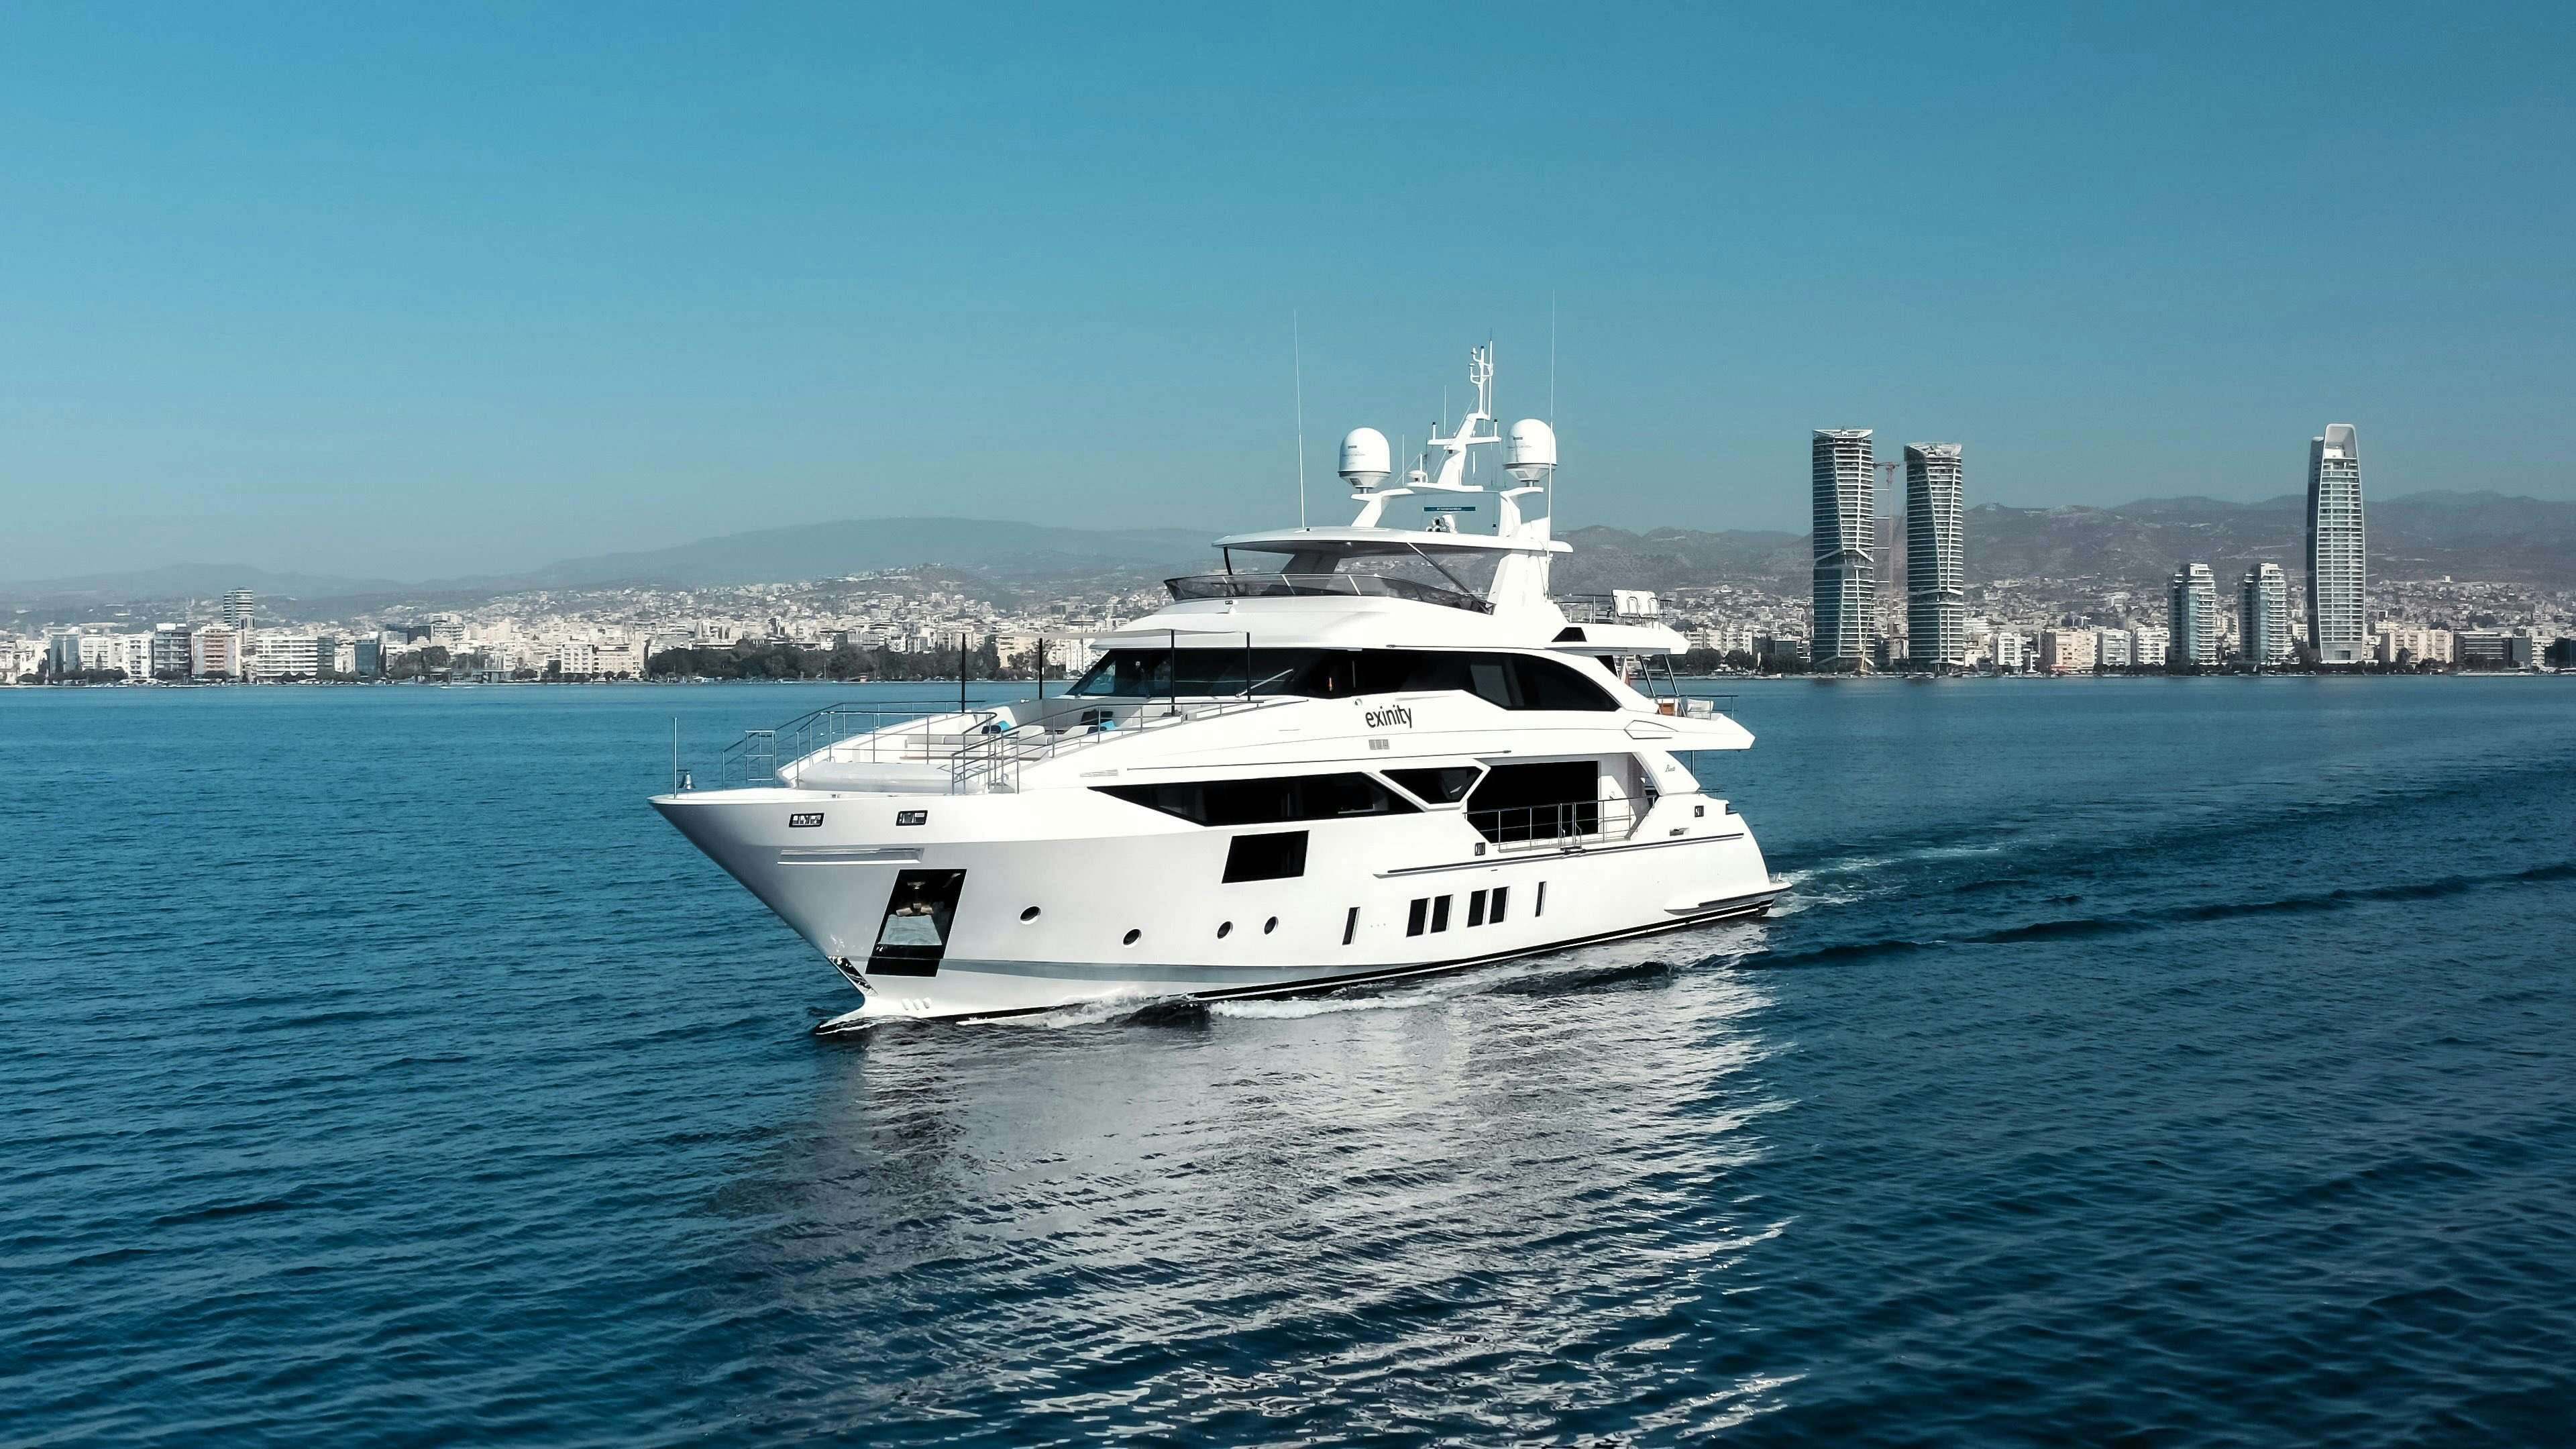 Exinity
Yacht for Sale